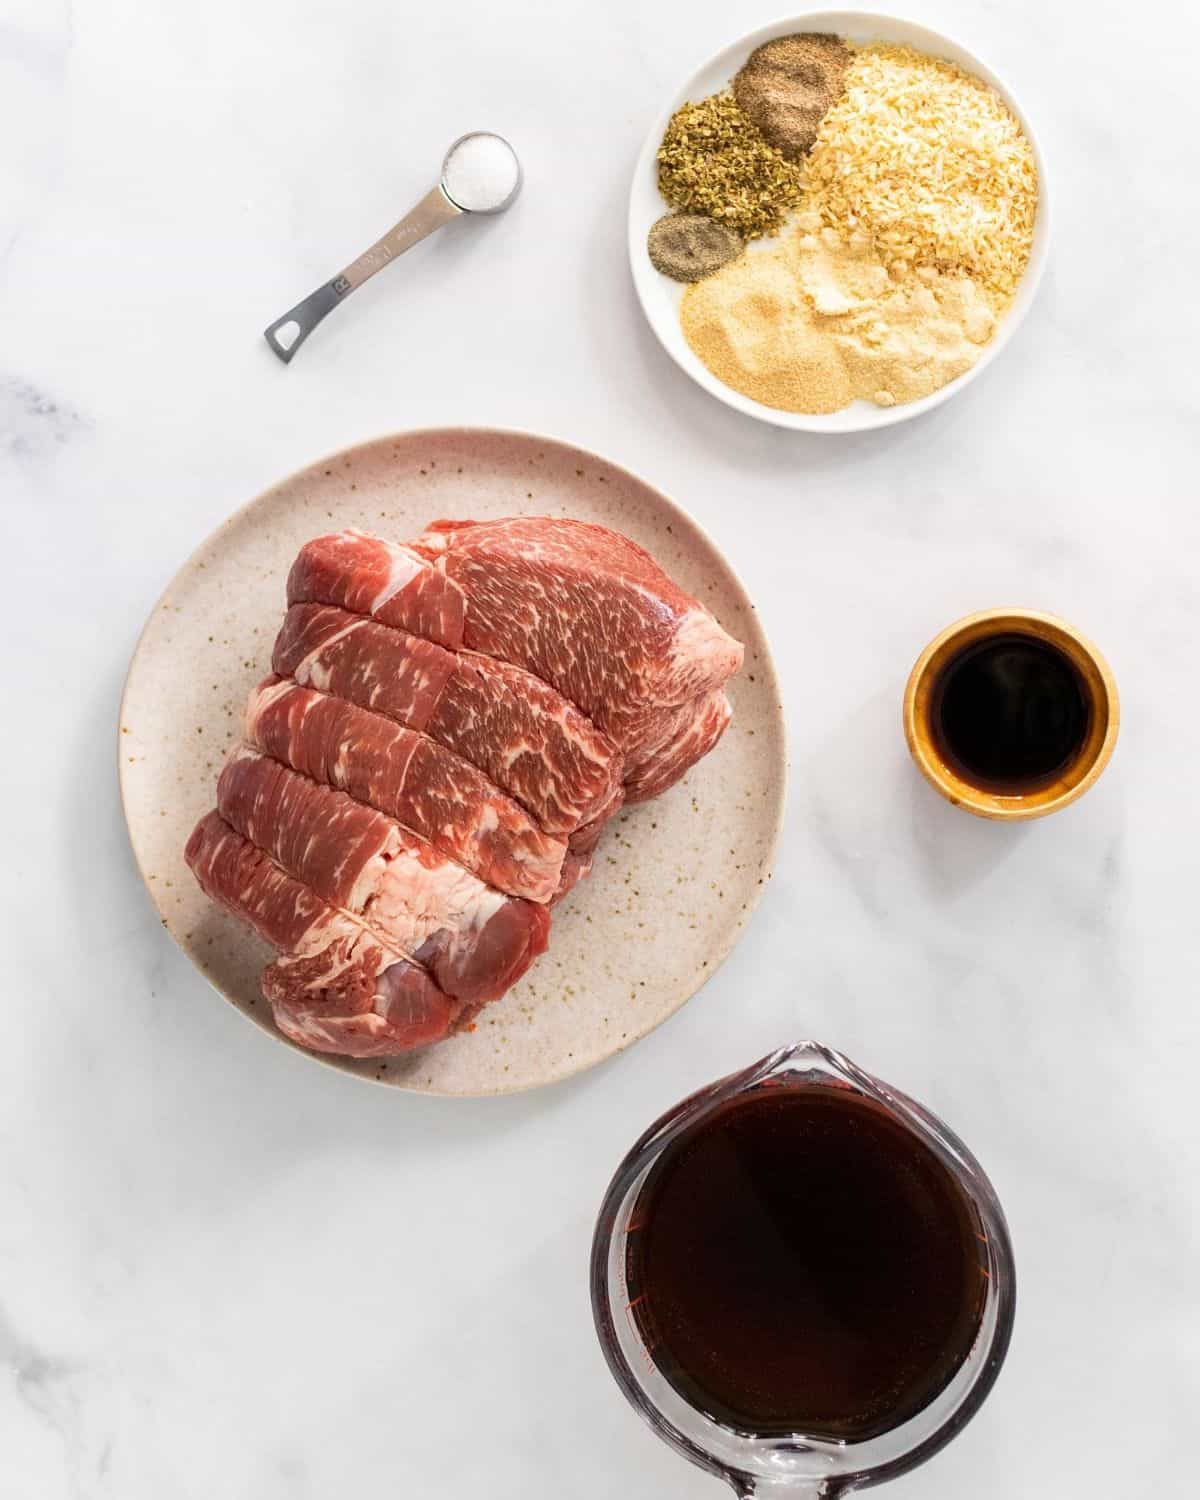 The ingredients to make slow cooker pot roast with homemade onion soup mix